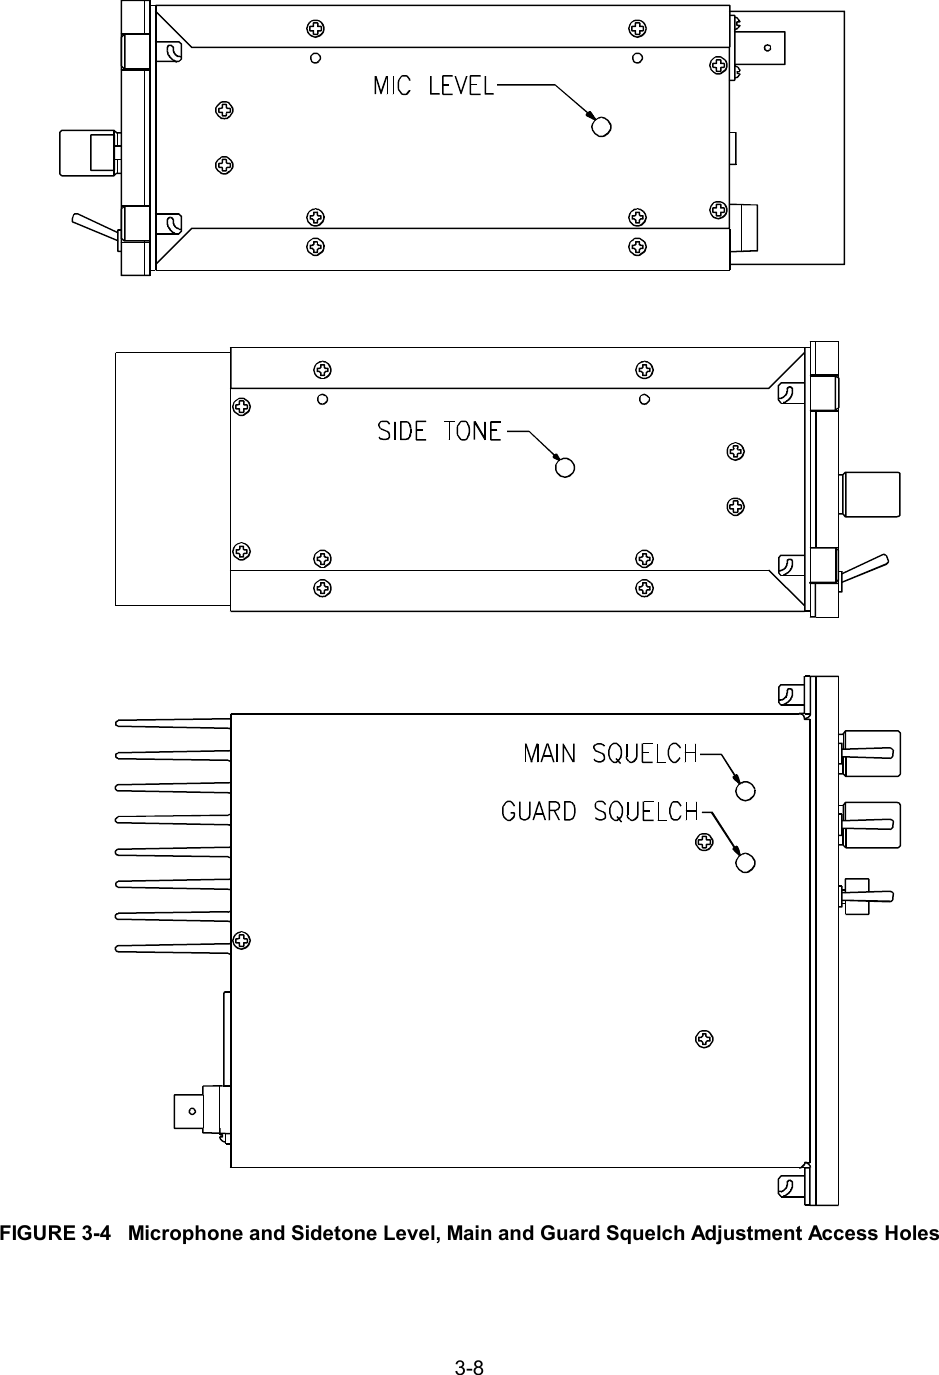 3-8FIGURE 3-4   Microphone and Sidetone Level, Main and Guard Squelch Adjustment Access Holes